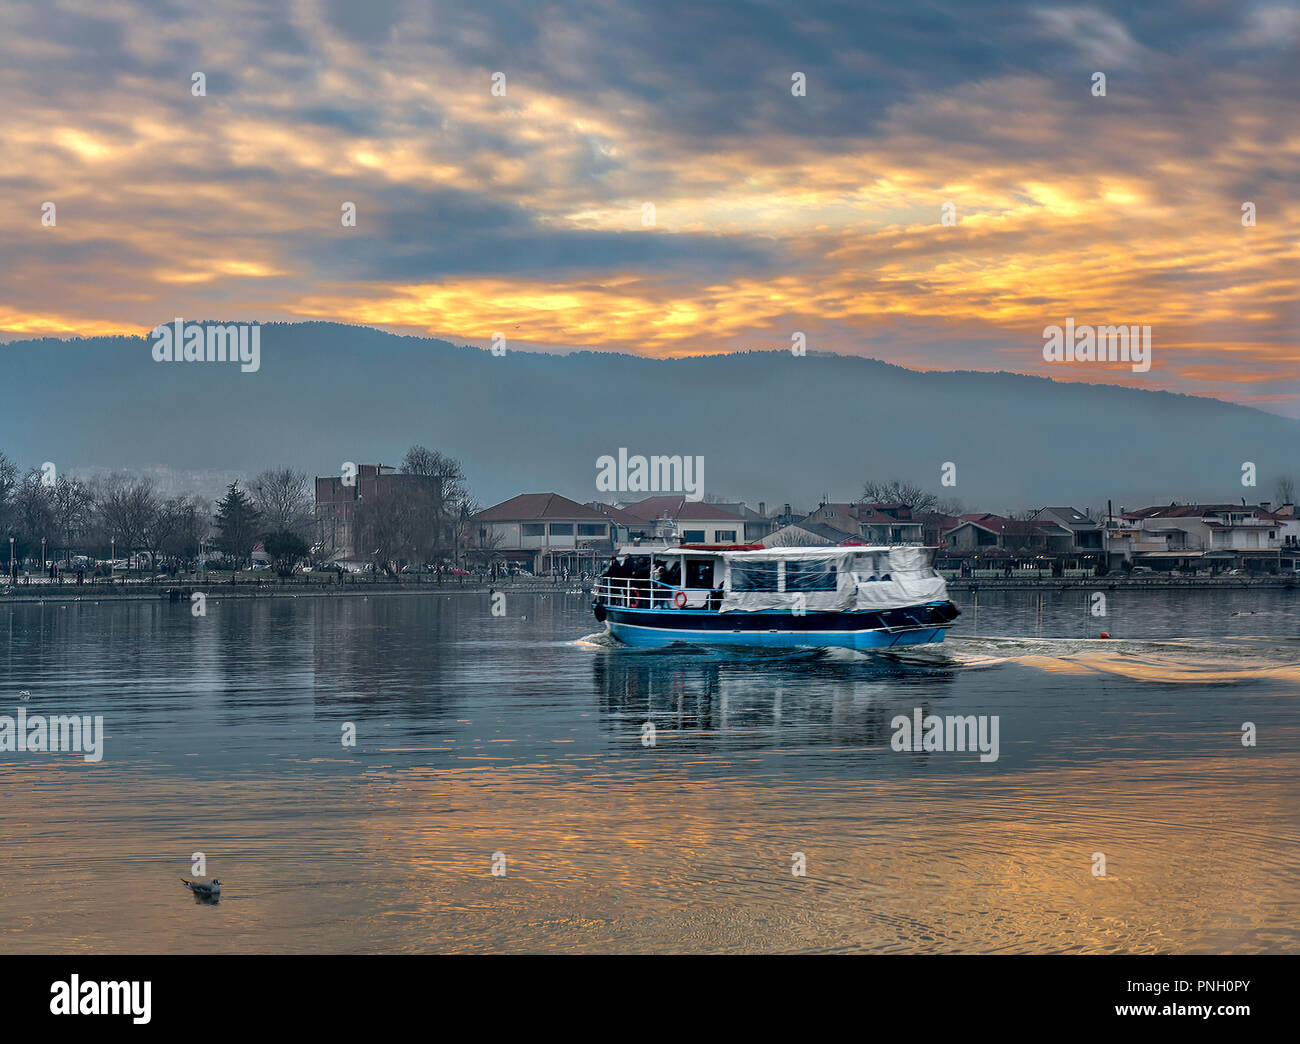 Sunset on Ioannina city. Small wooden boat floating the calm waters on lake Pamvotis and transfer passengers to a  very small island inside the lake.  Stock Photo